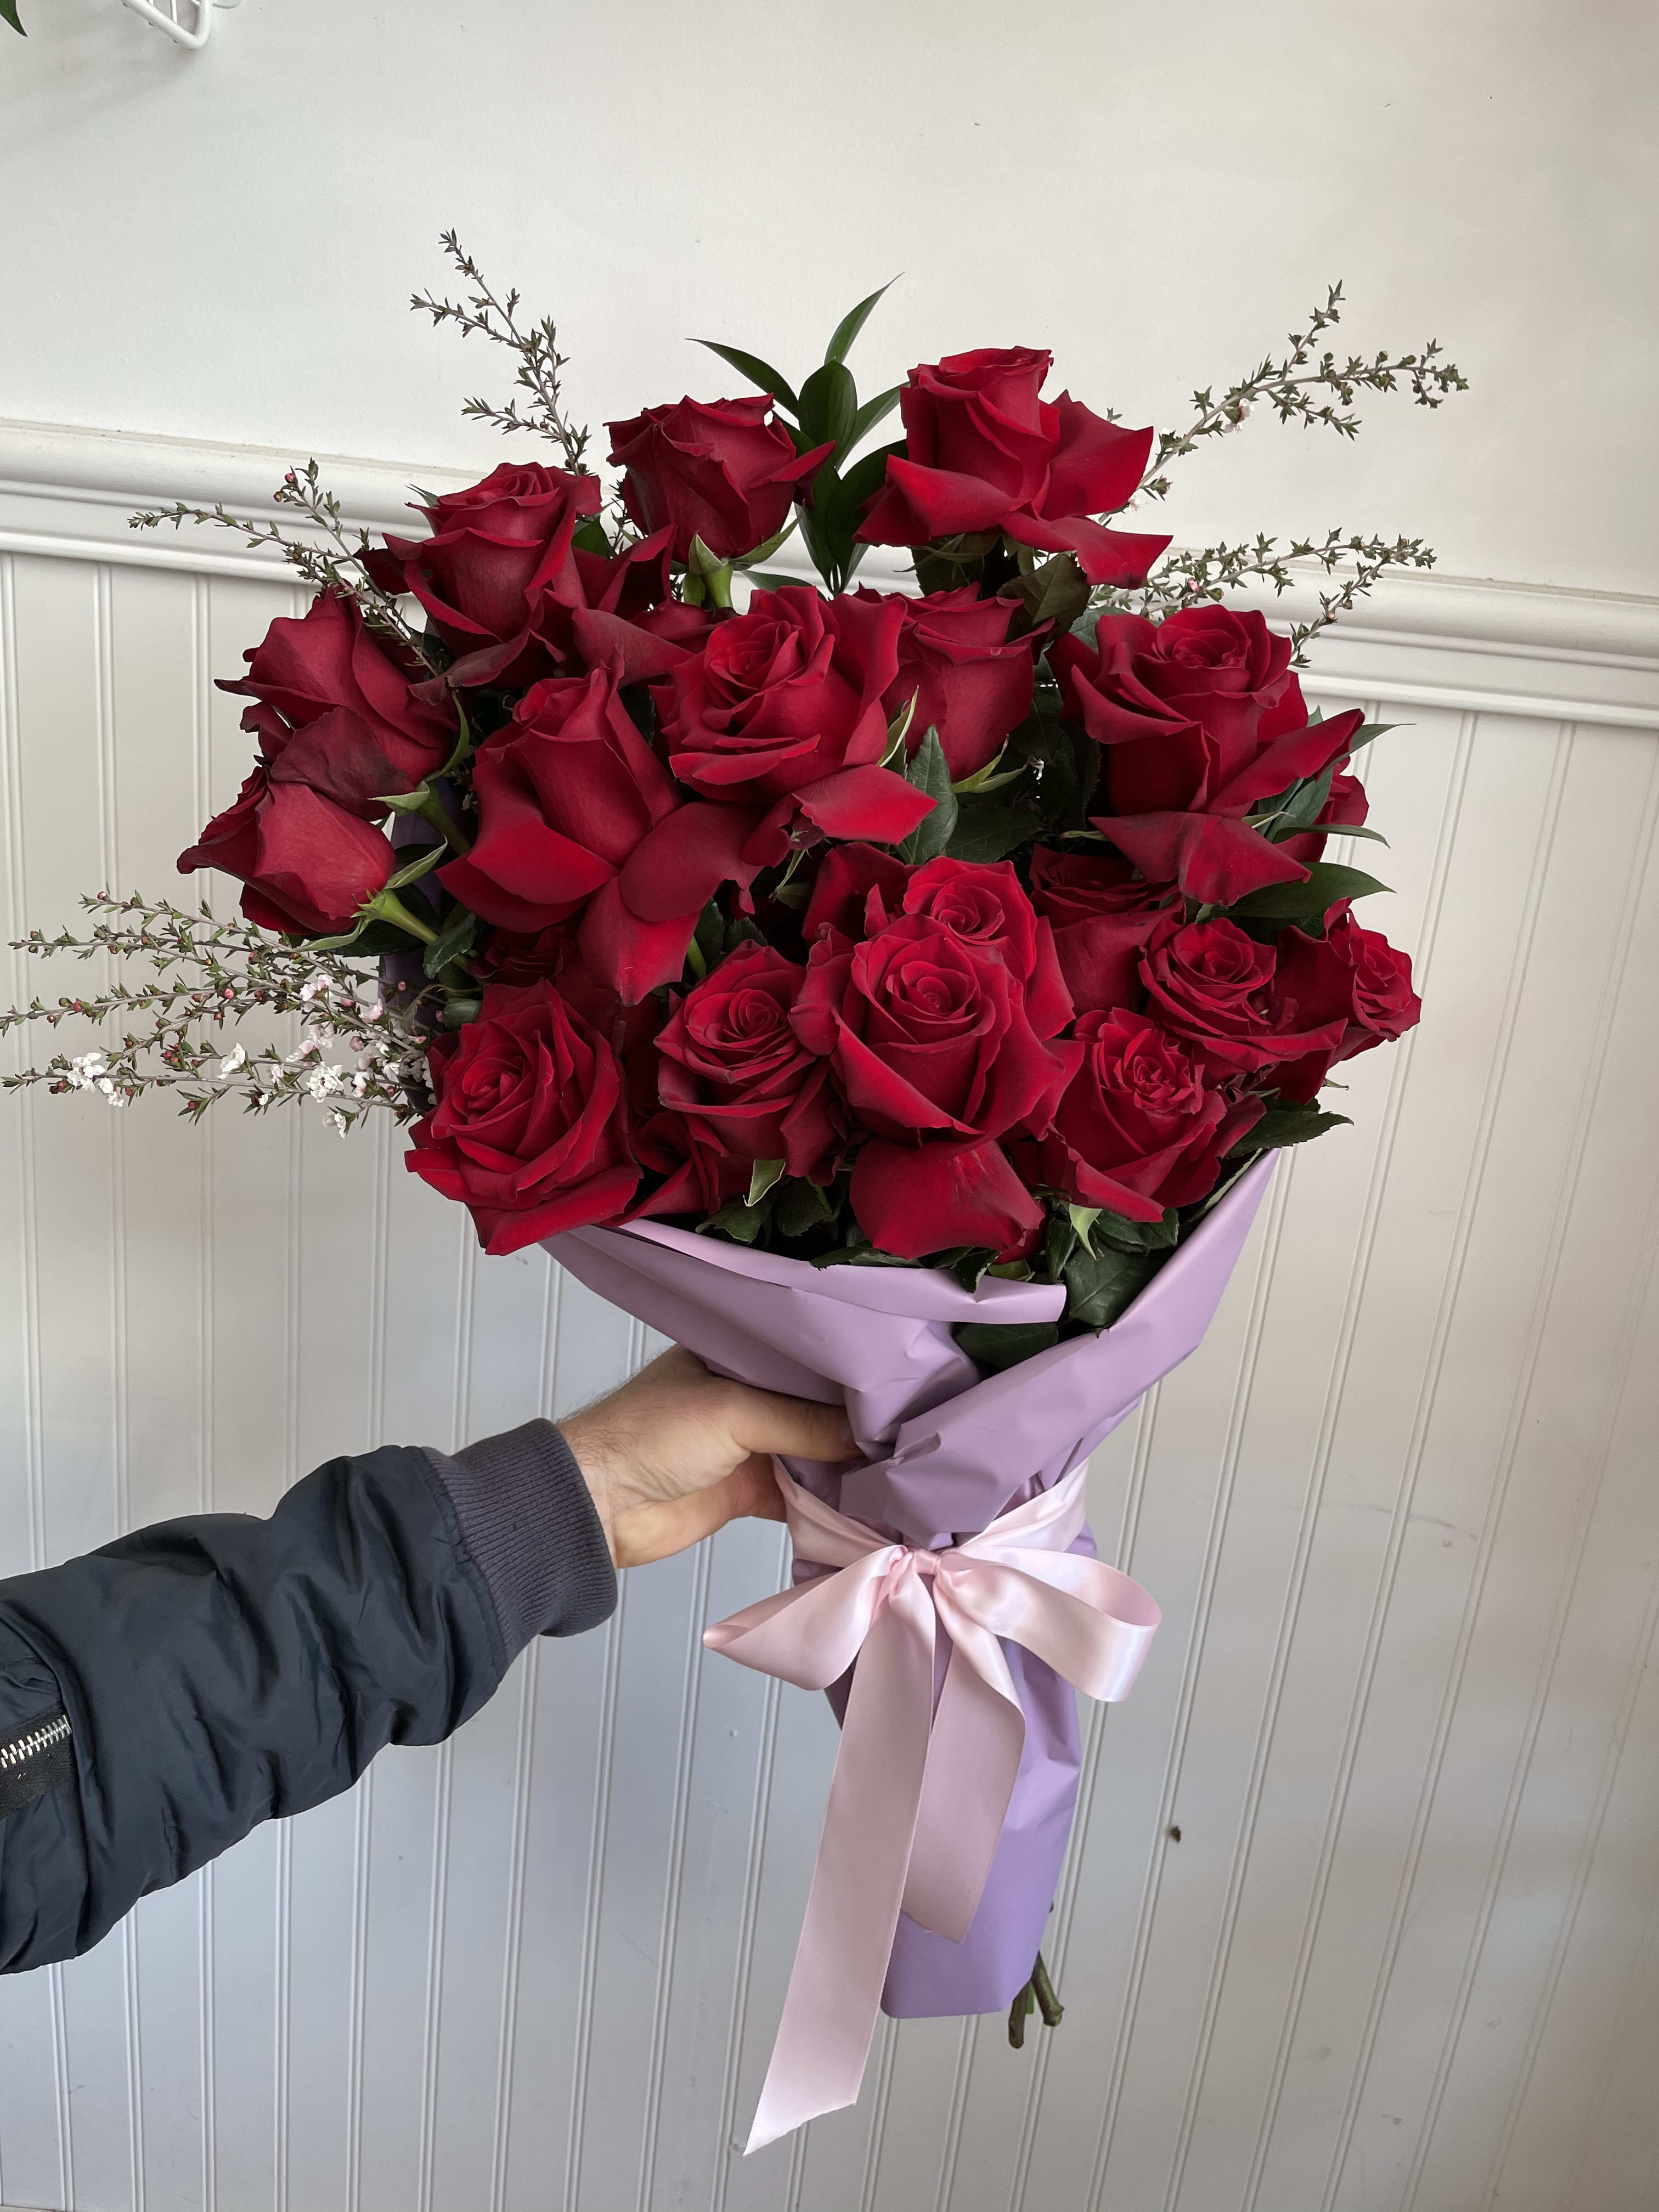 Red Roses Bouquet with Beautiful Pink Ribbon Around